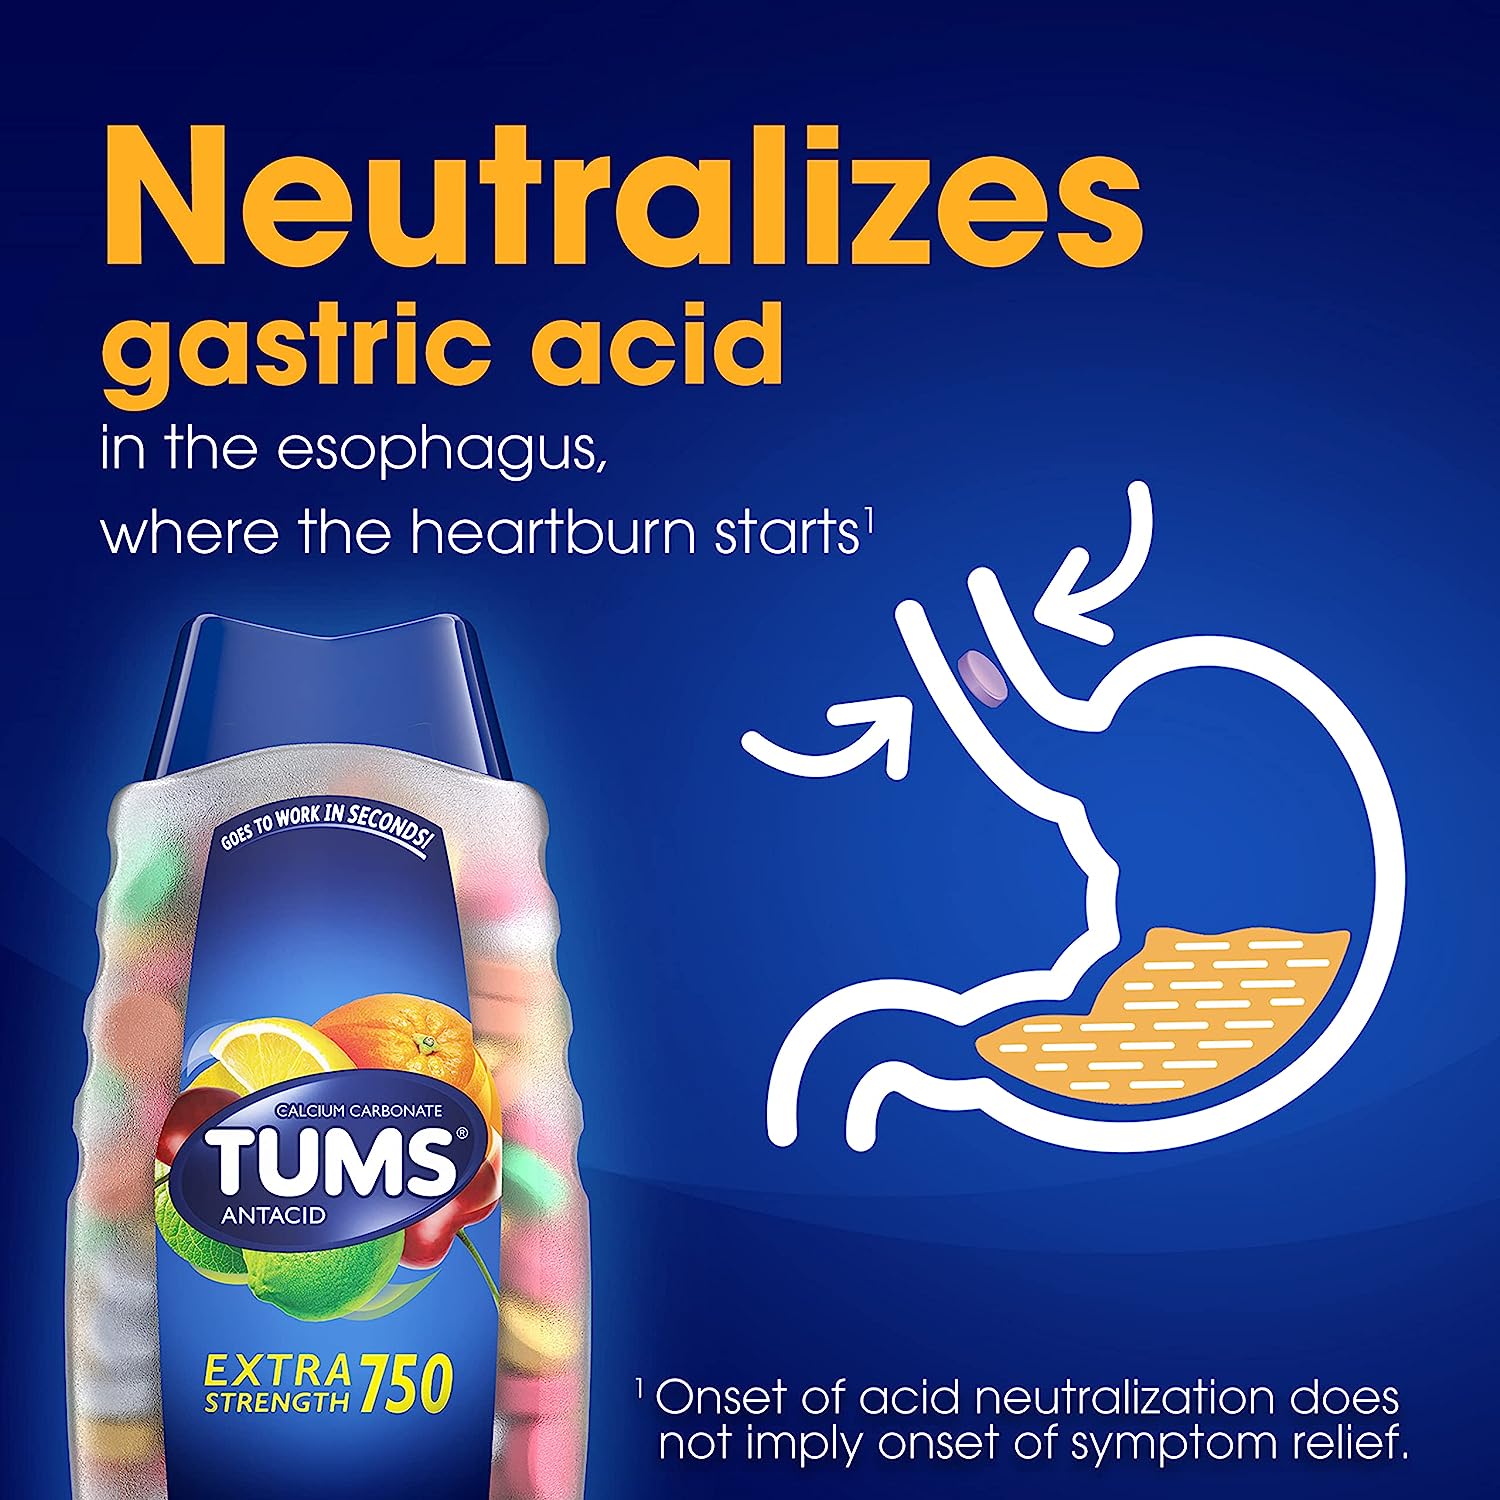 Tums Antacid Tablets for Chewable Heartburn Relief and Acid Indigestion Relief (100 units) Beautiful